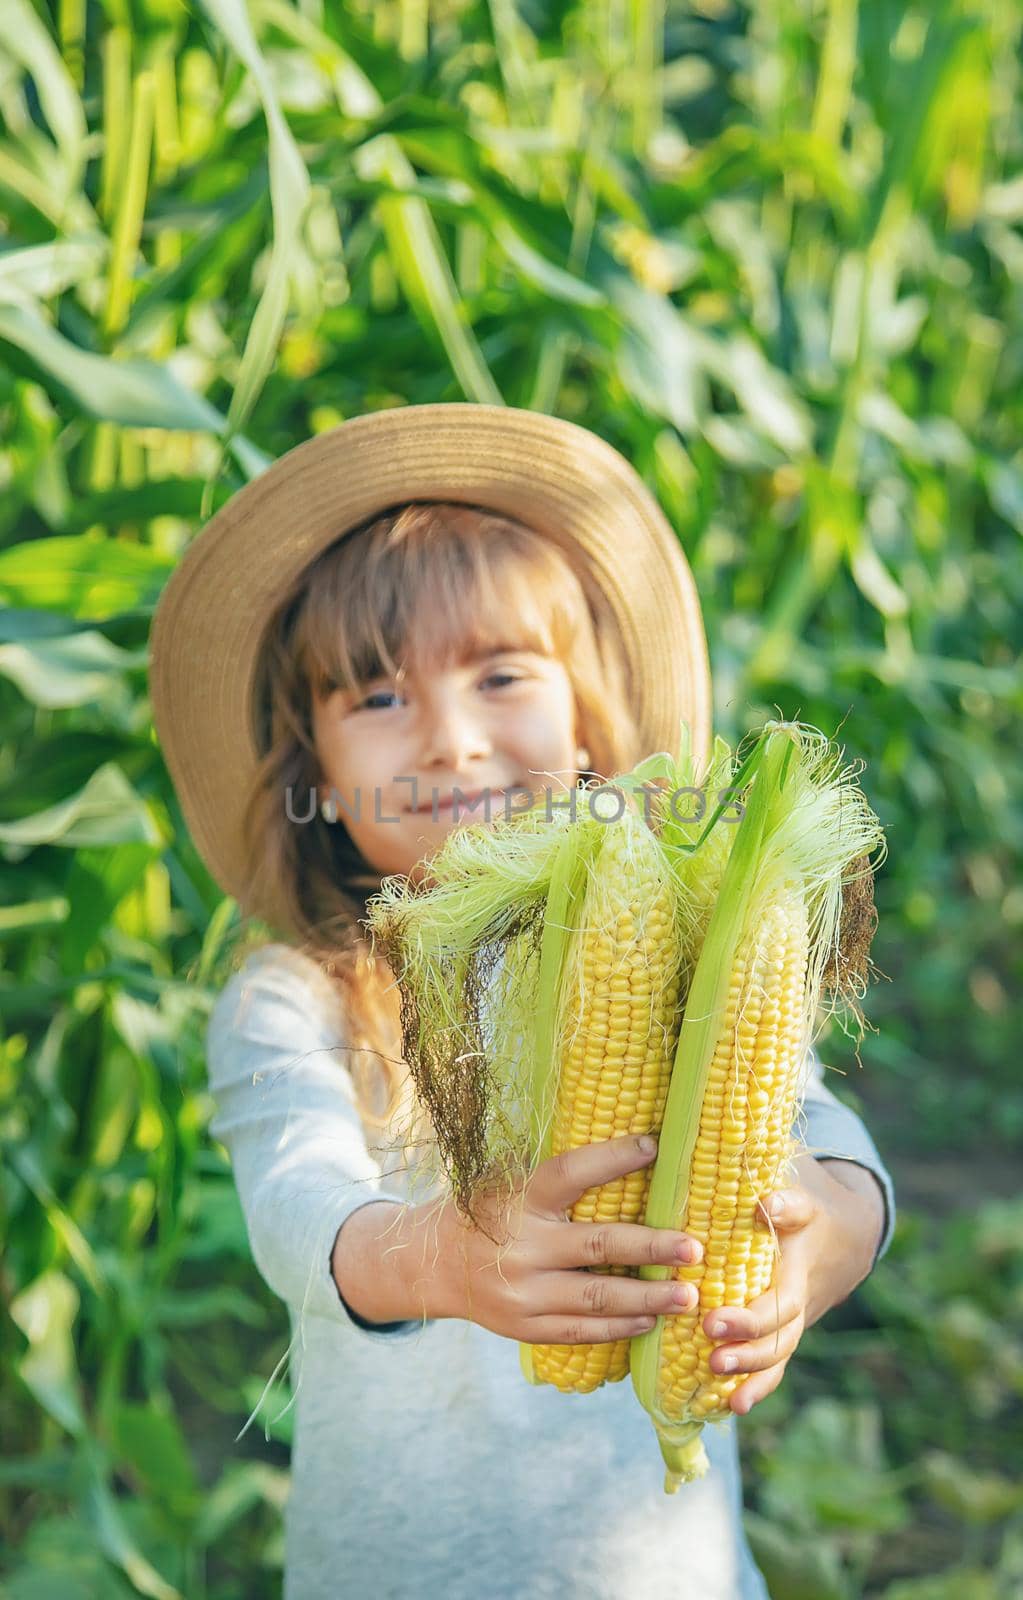 Corn on the field in the hands of a child. Selective focus.